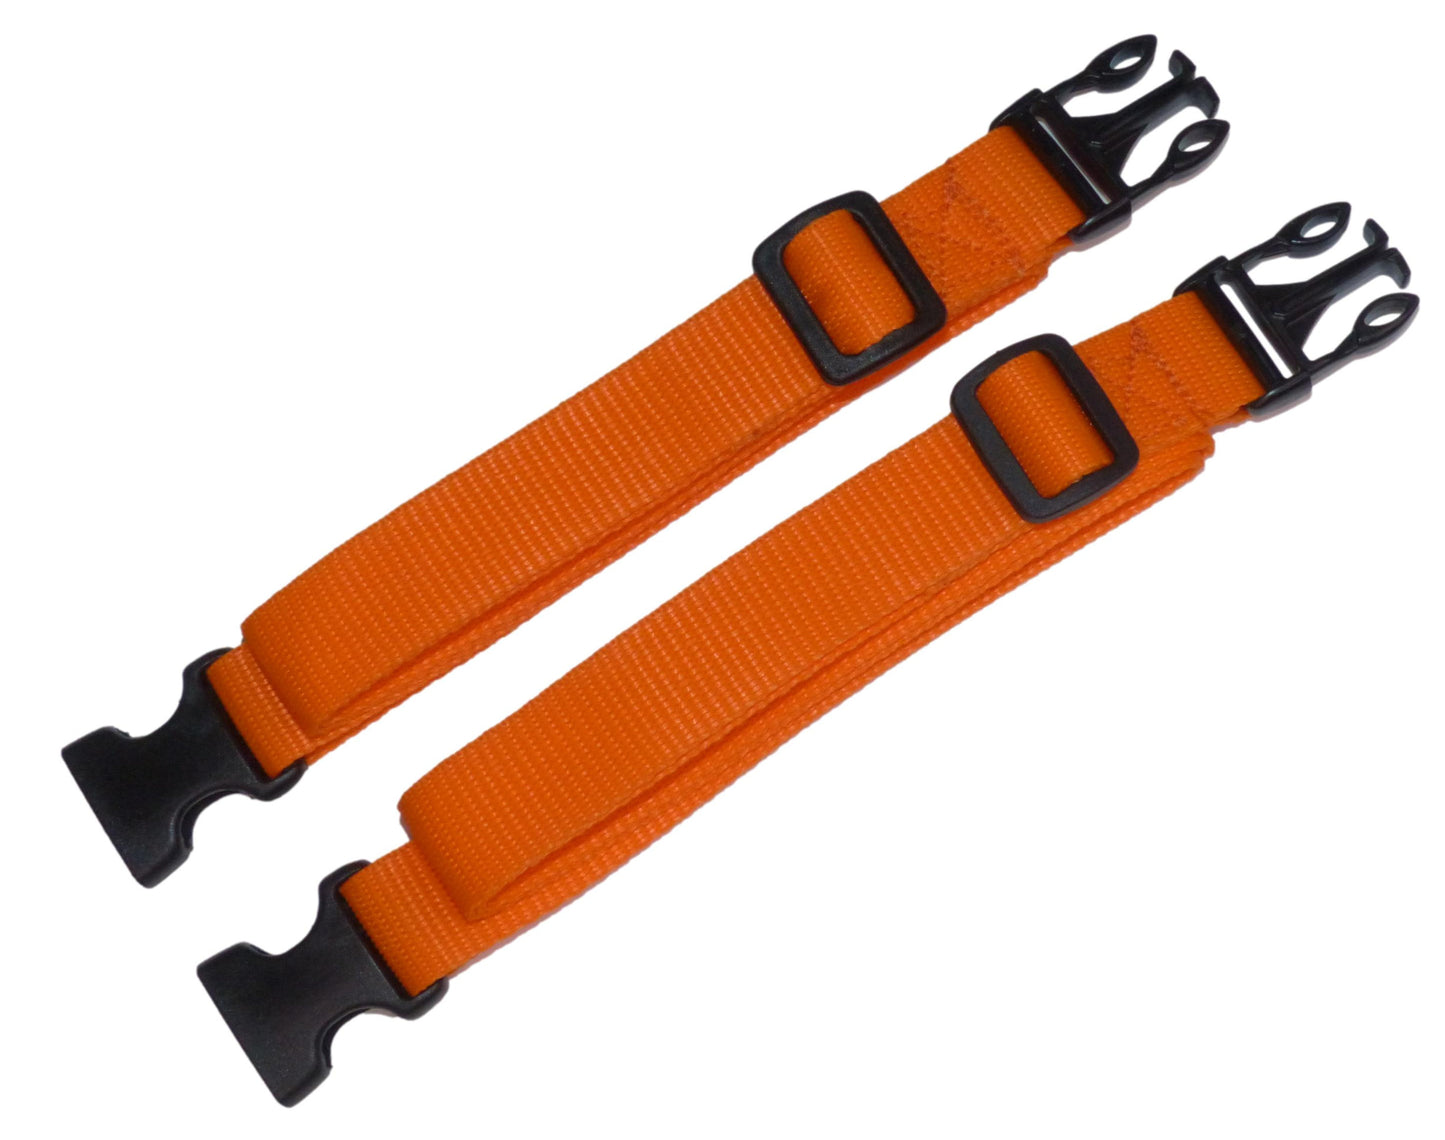 25mm Webbing Strap with Quick Release & Length-Adjusting Buckles (Pair) in orange